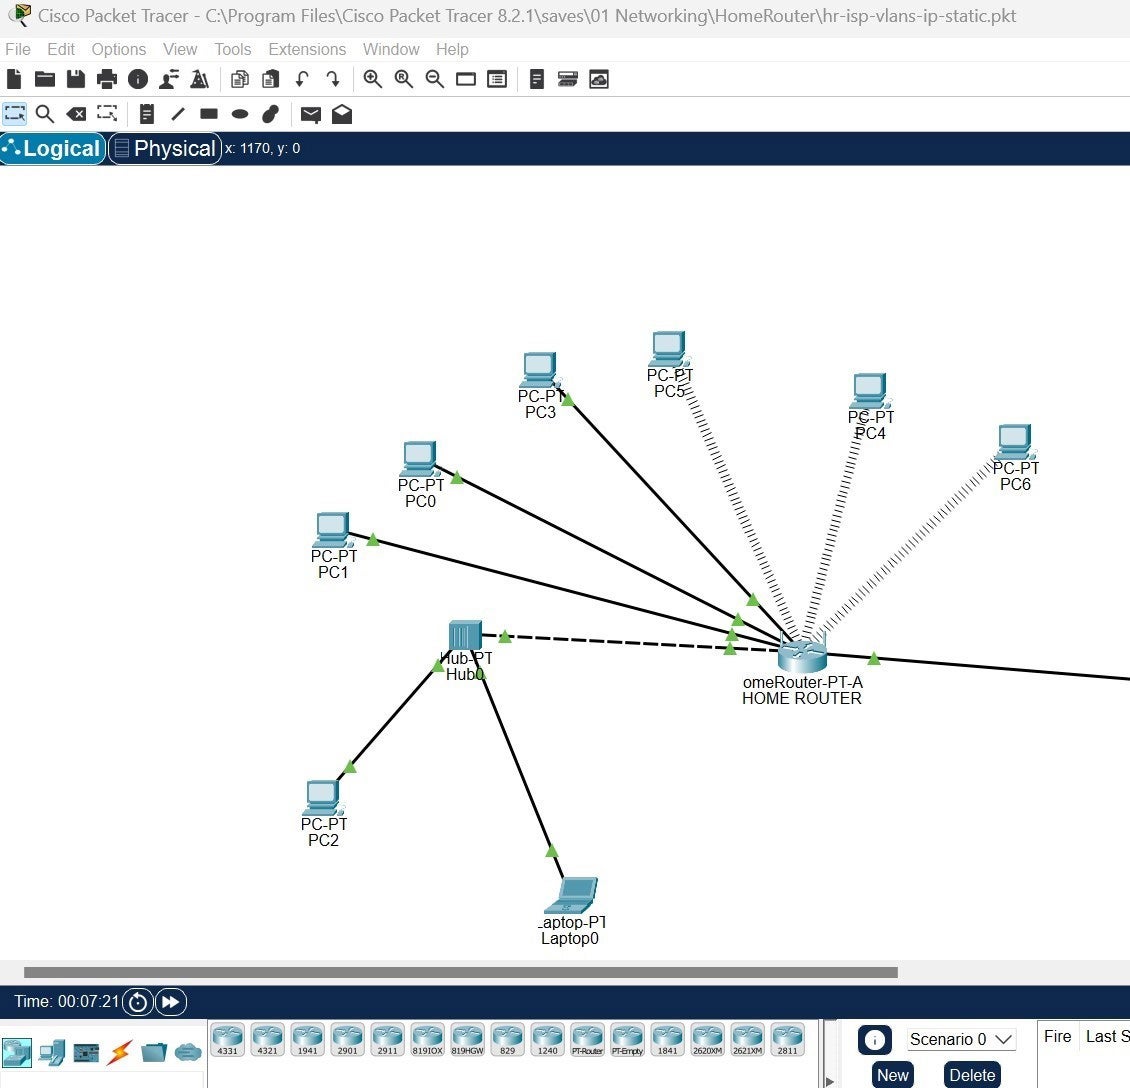 Design of a simple network in Cisco Packet Tracer.